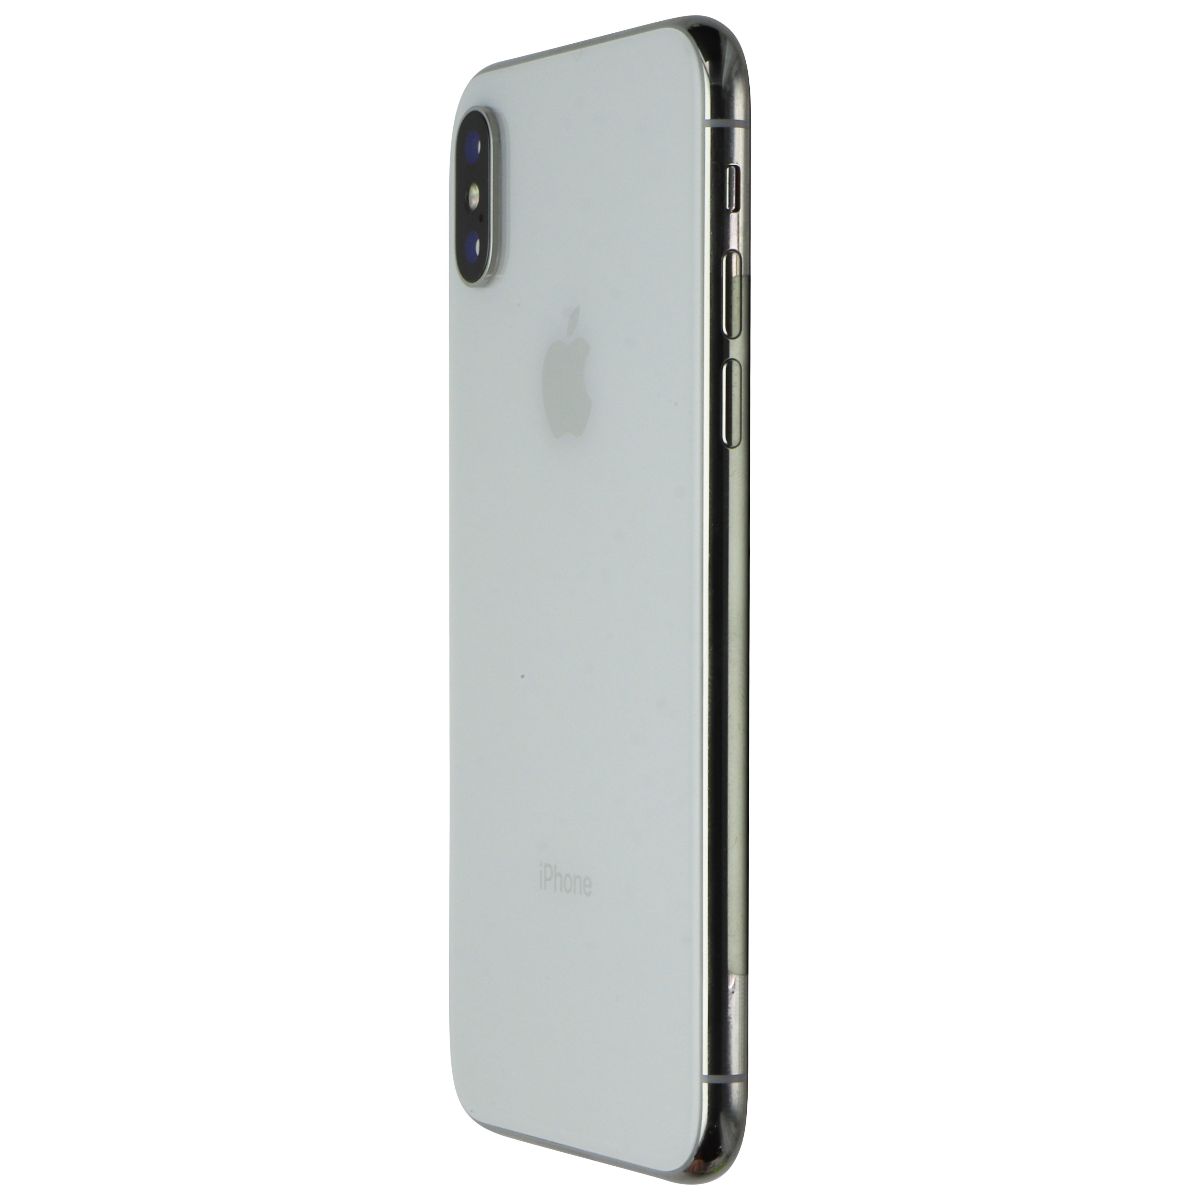 Apple iPhone X (5.8-inch) (A1865) Unlocked - 64GB / Silver - Bad Face ID* Cell Phones & Smartphones Apple    - Simple Cell Bulk Wholesale Pricing - USA Seller